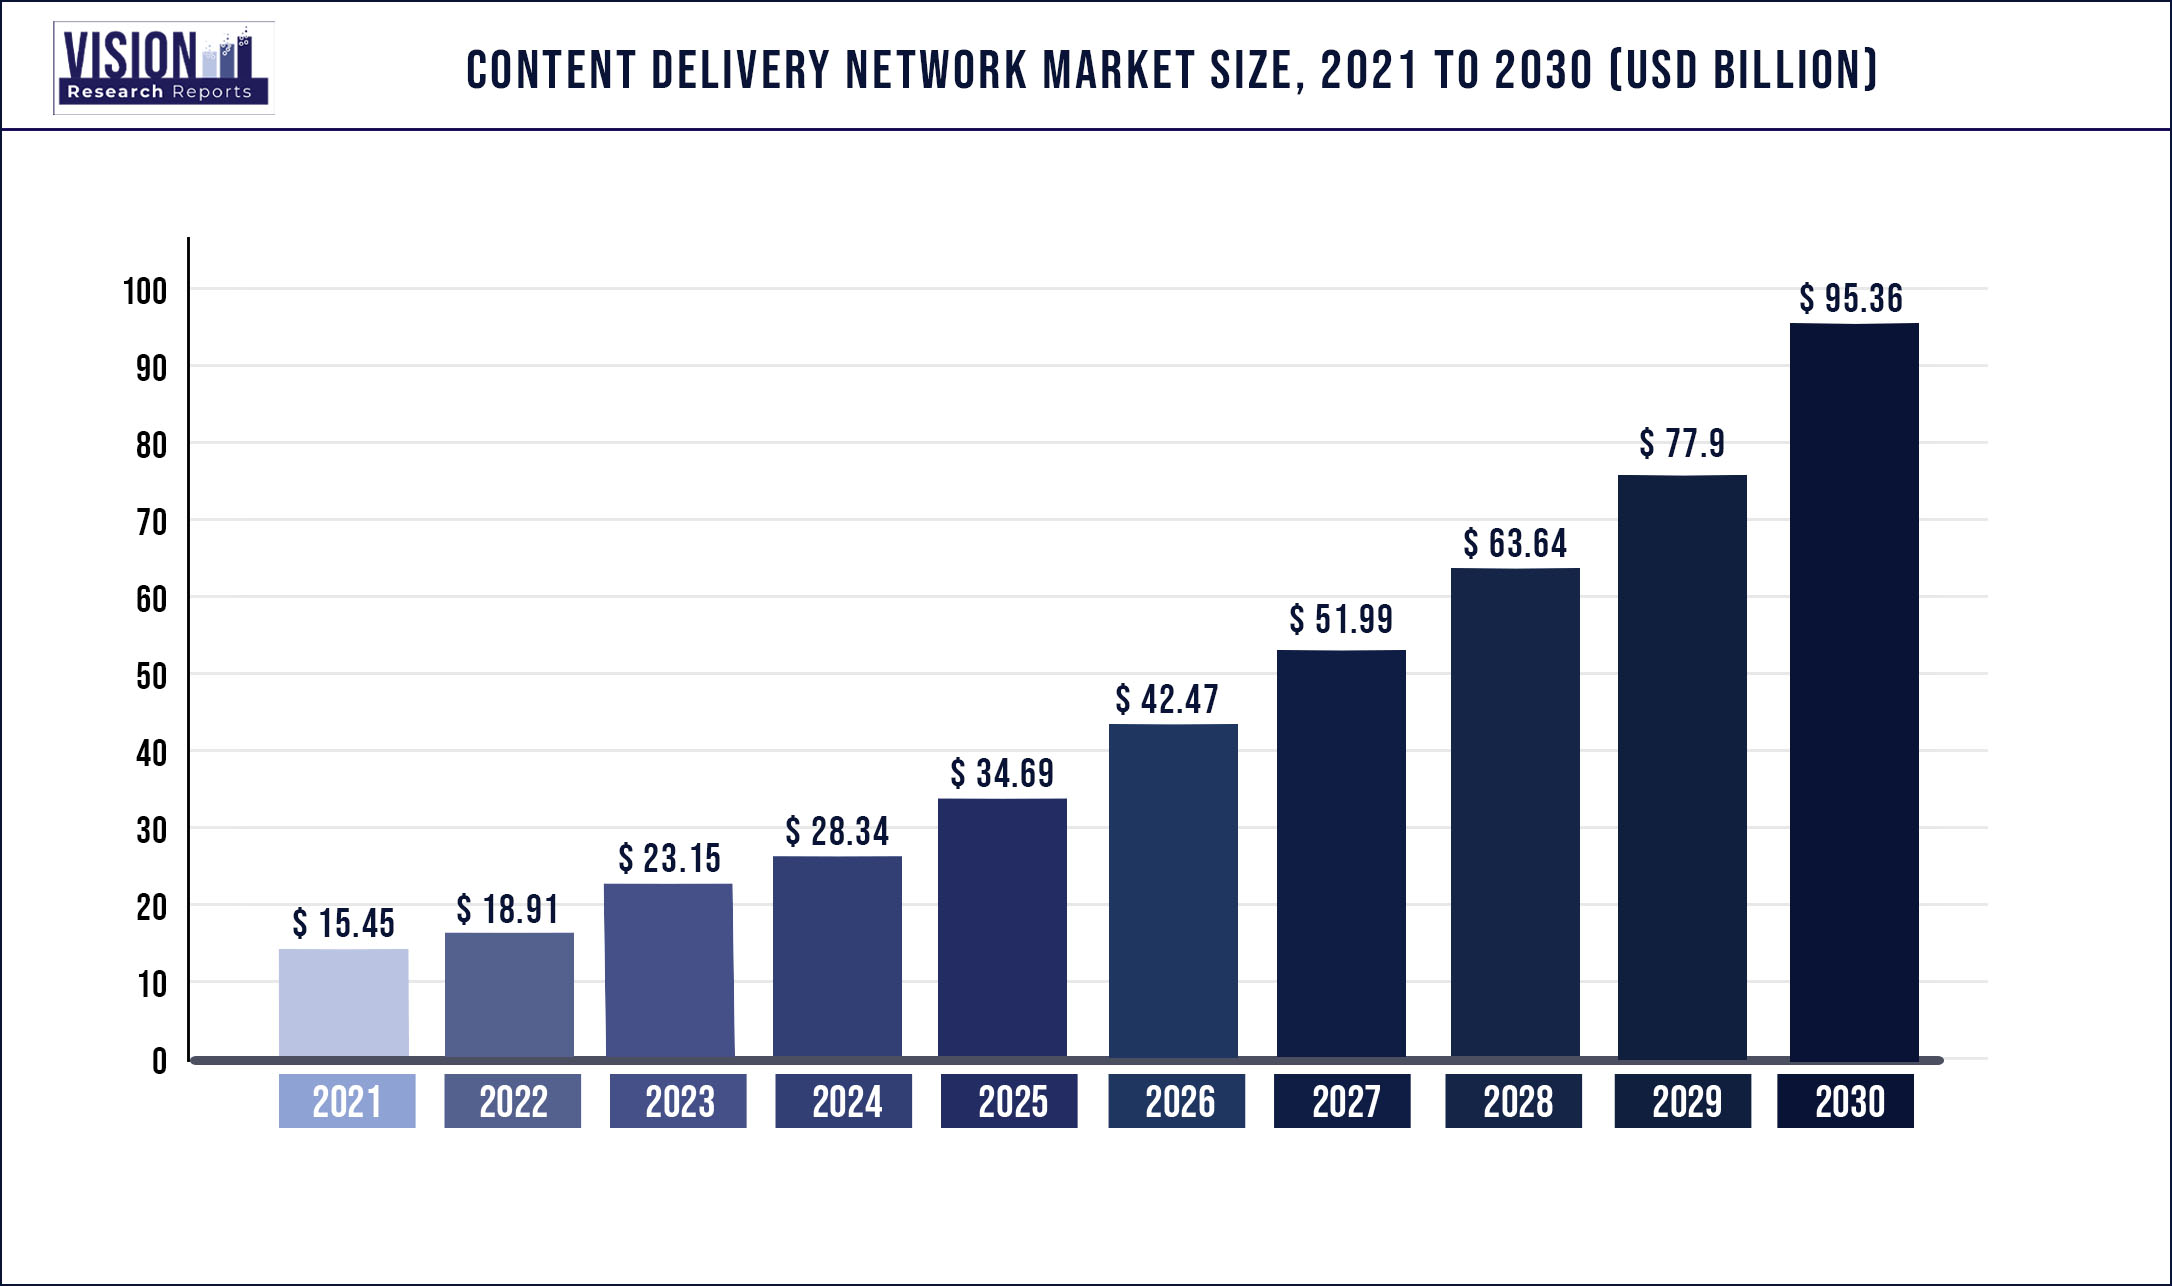 Content Delivery Network Market Size 2021 to 2030